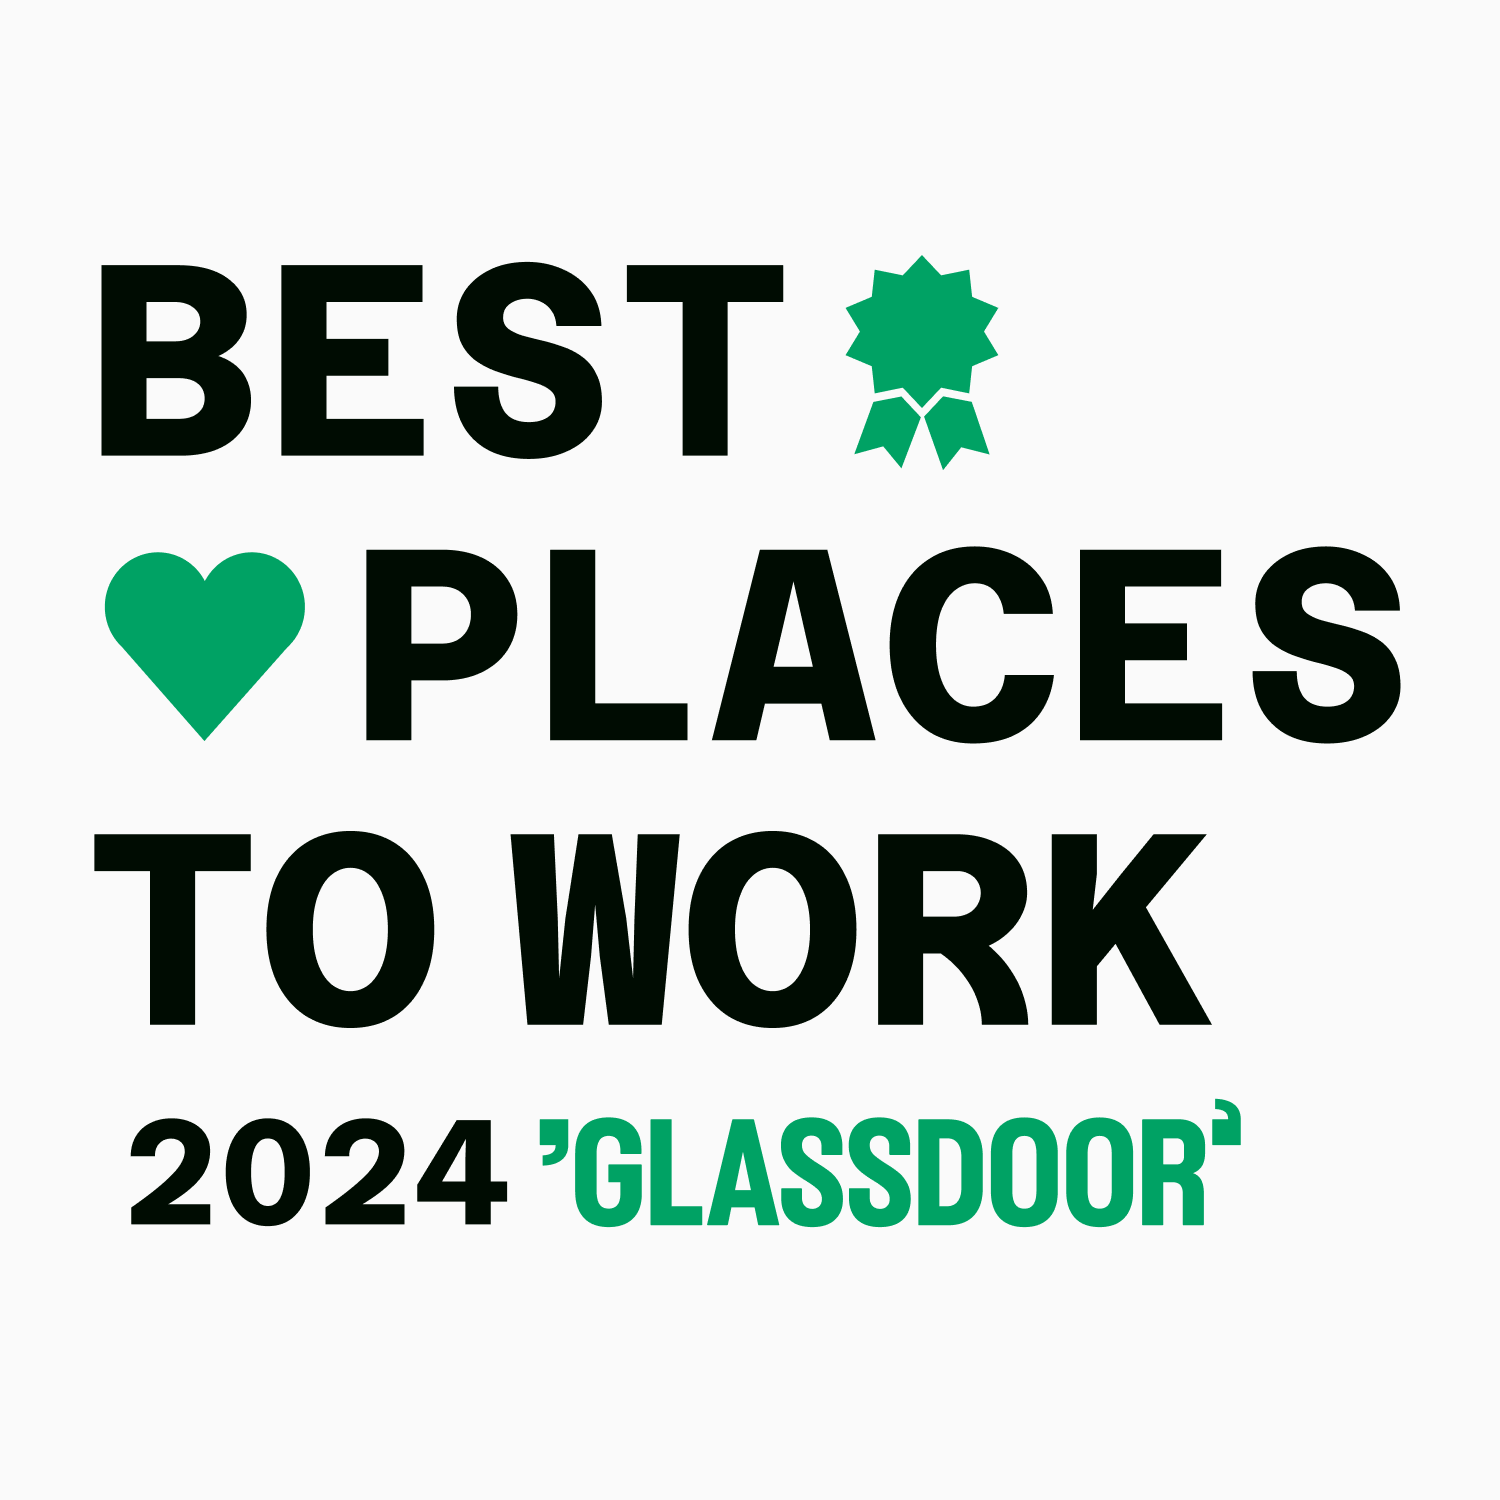 2024 best places to work by Glassdoor